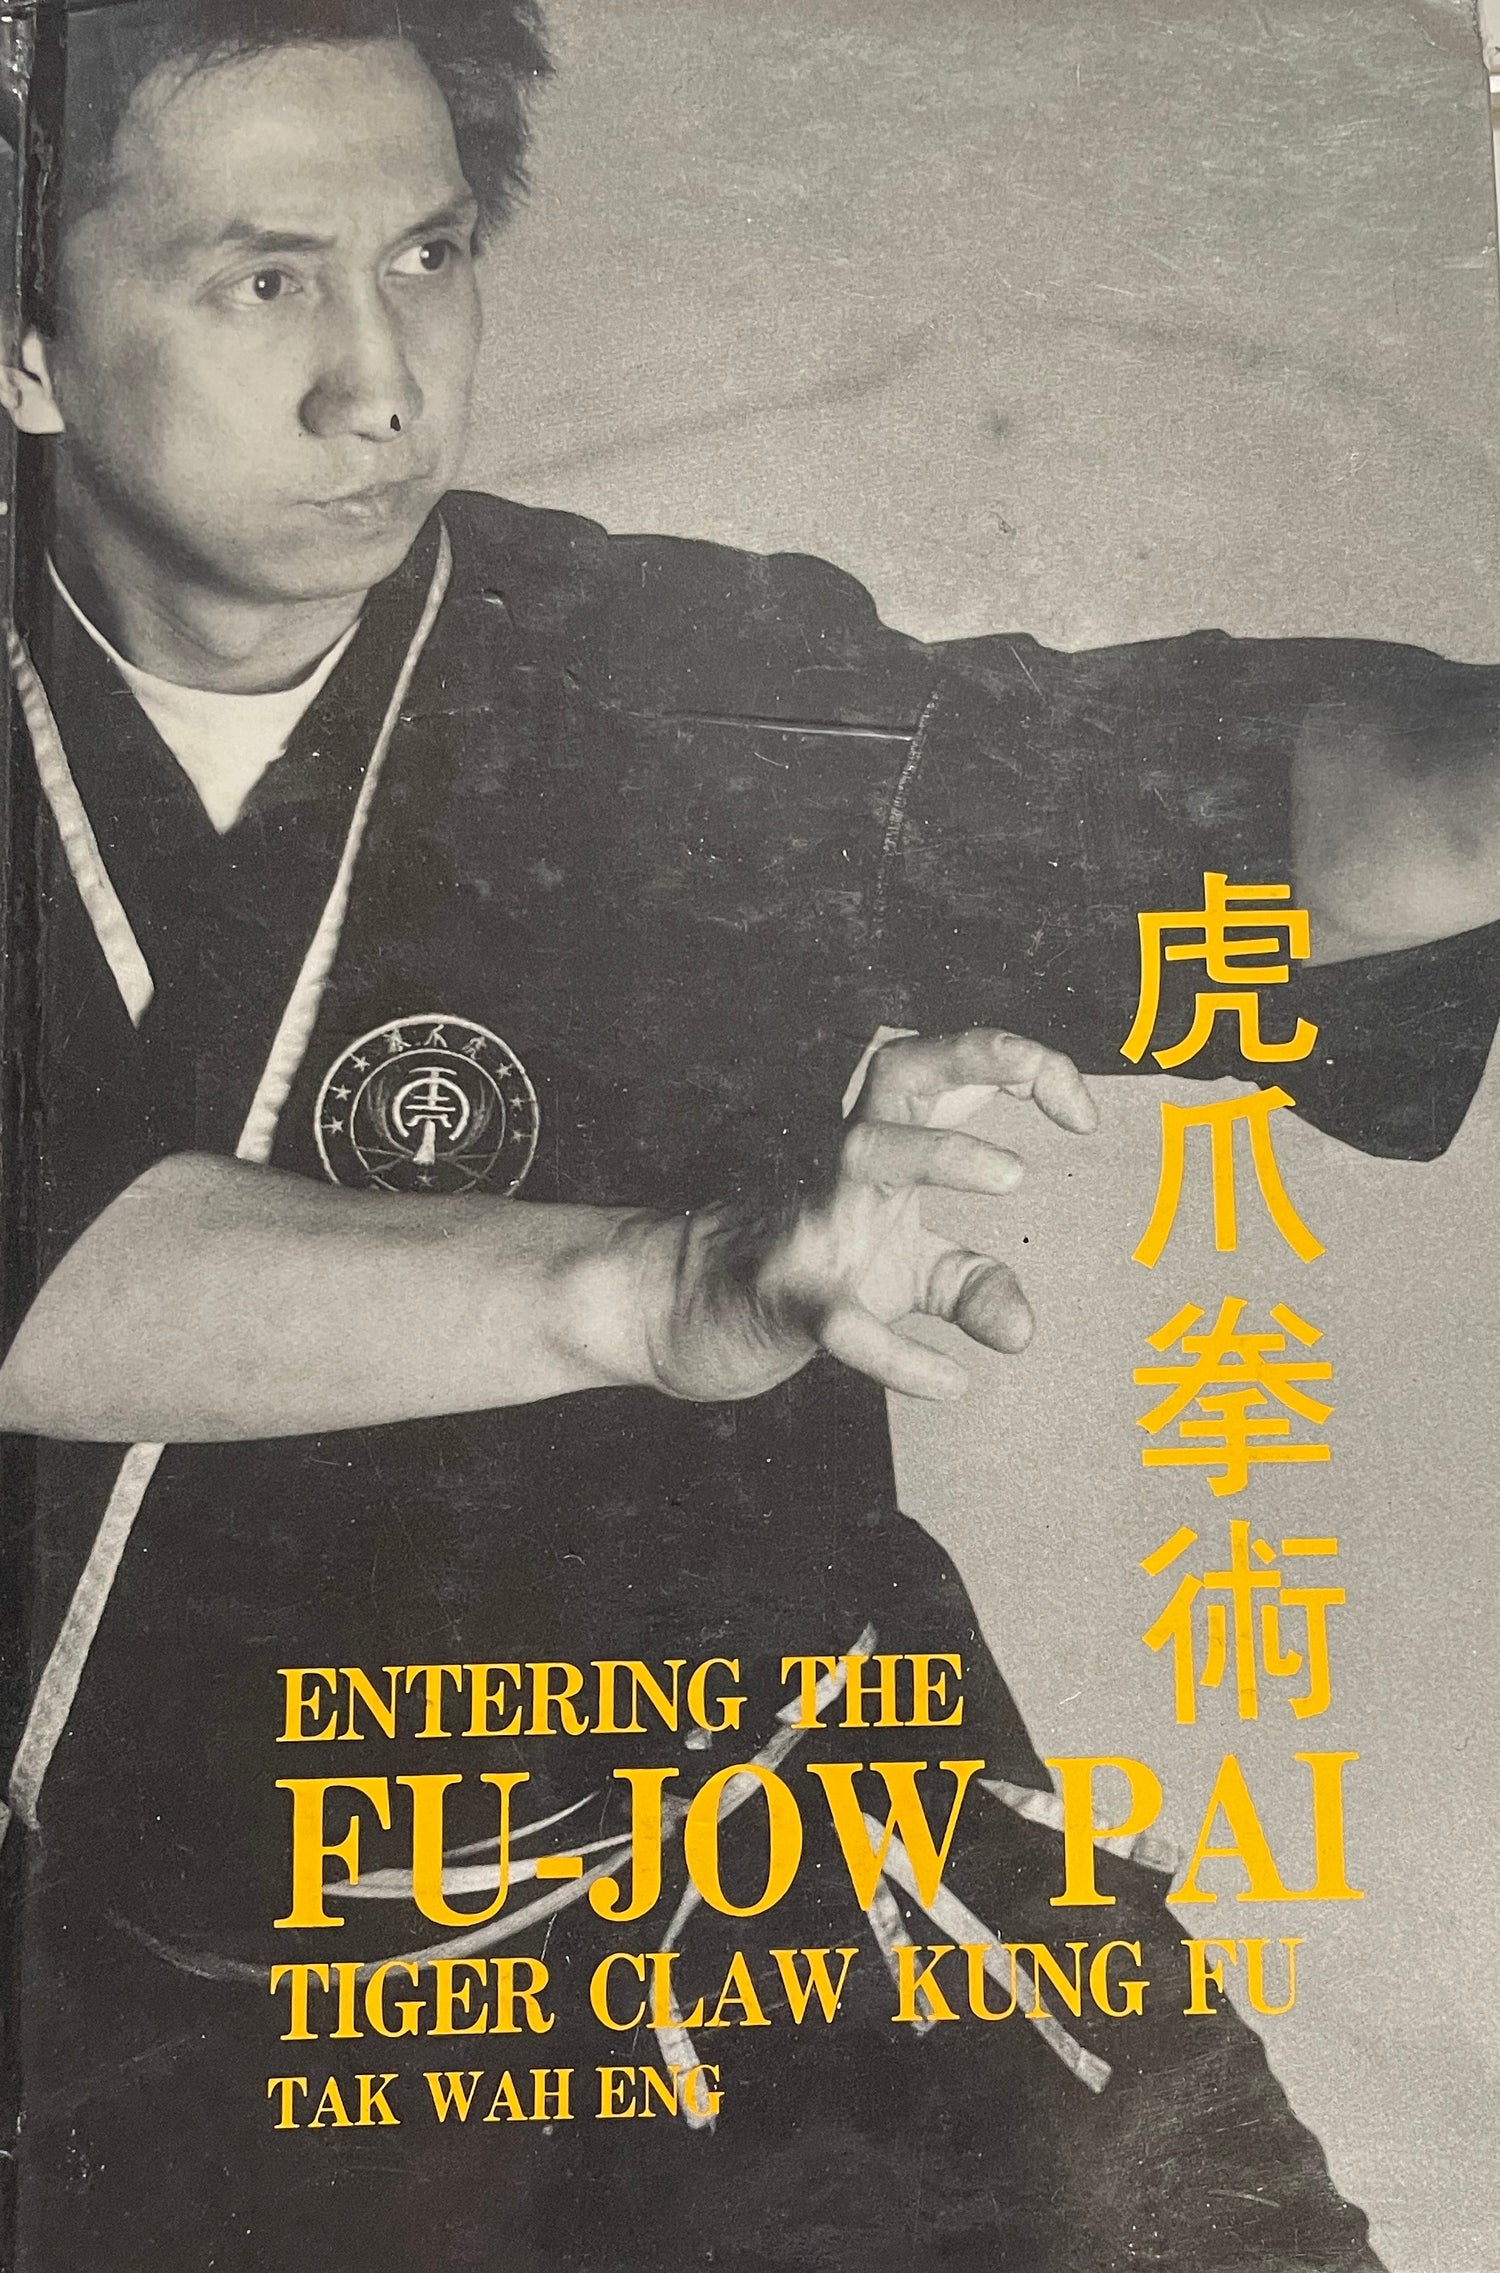 Entering the Fu-jow pai Tiger claw kung fu Book by Tak Wah Eng (Preowned)